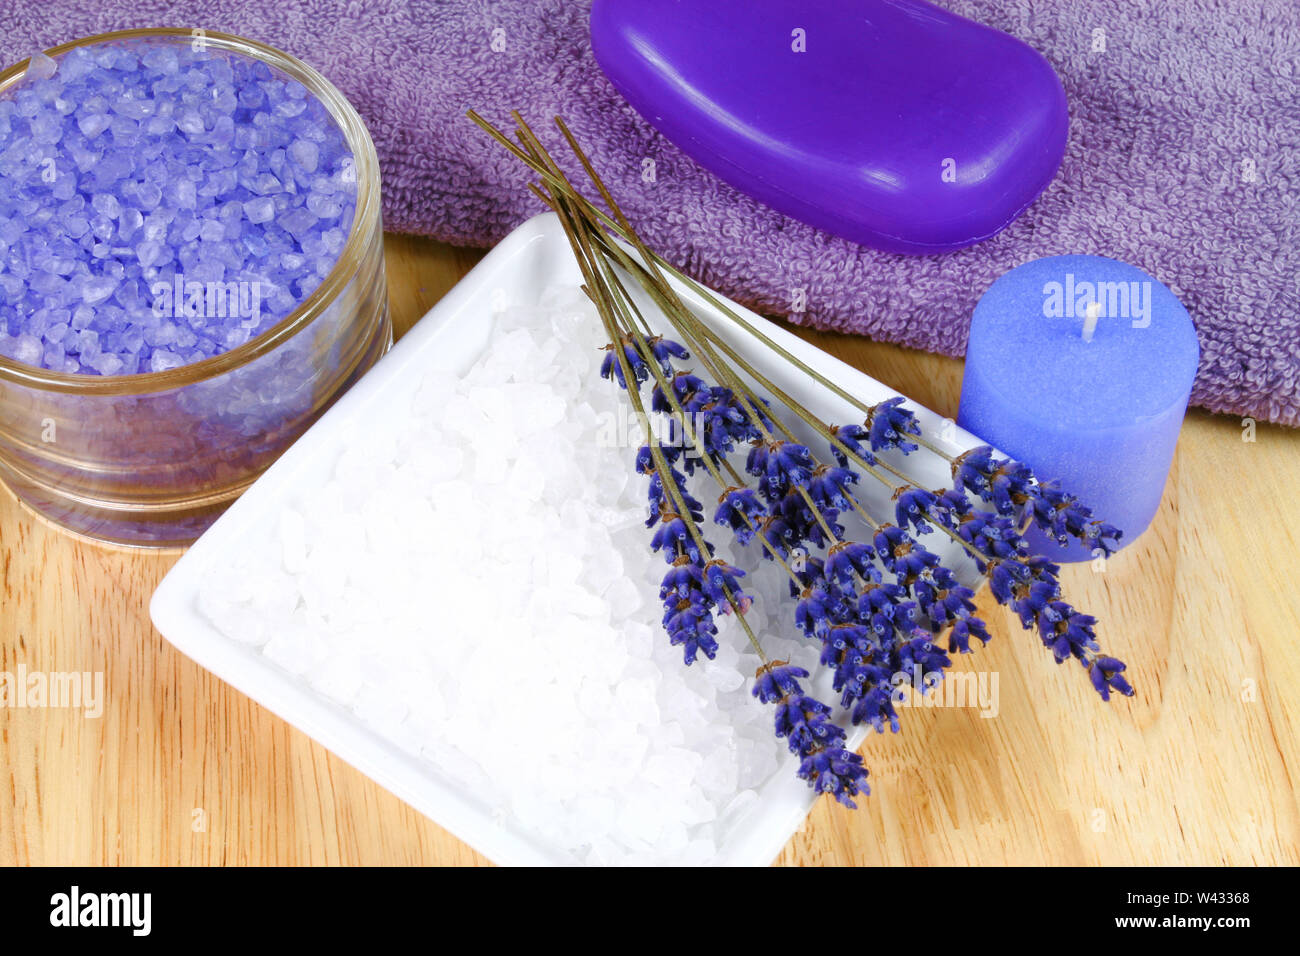 Lavender aroma and body therapy in spa Stock Photo